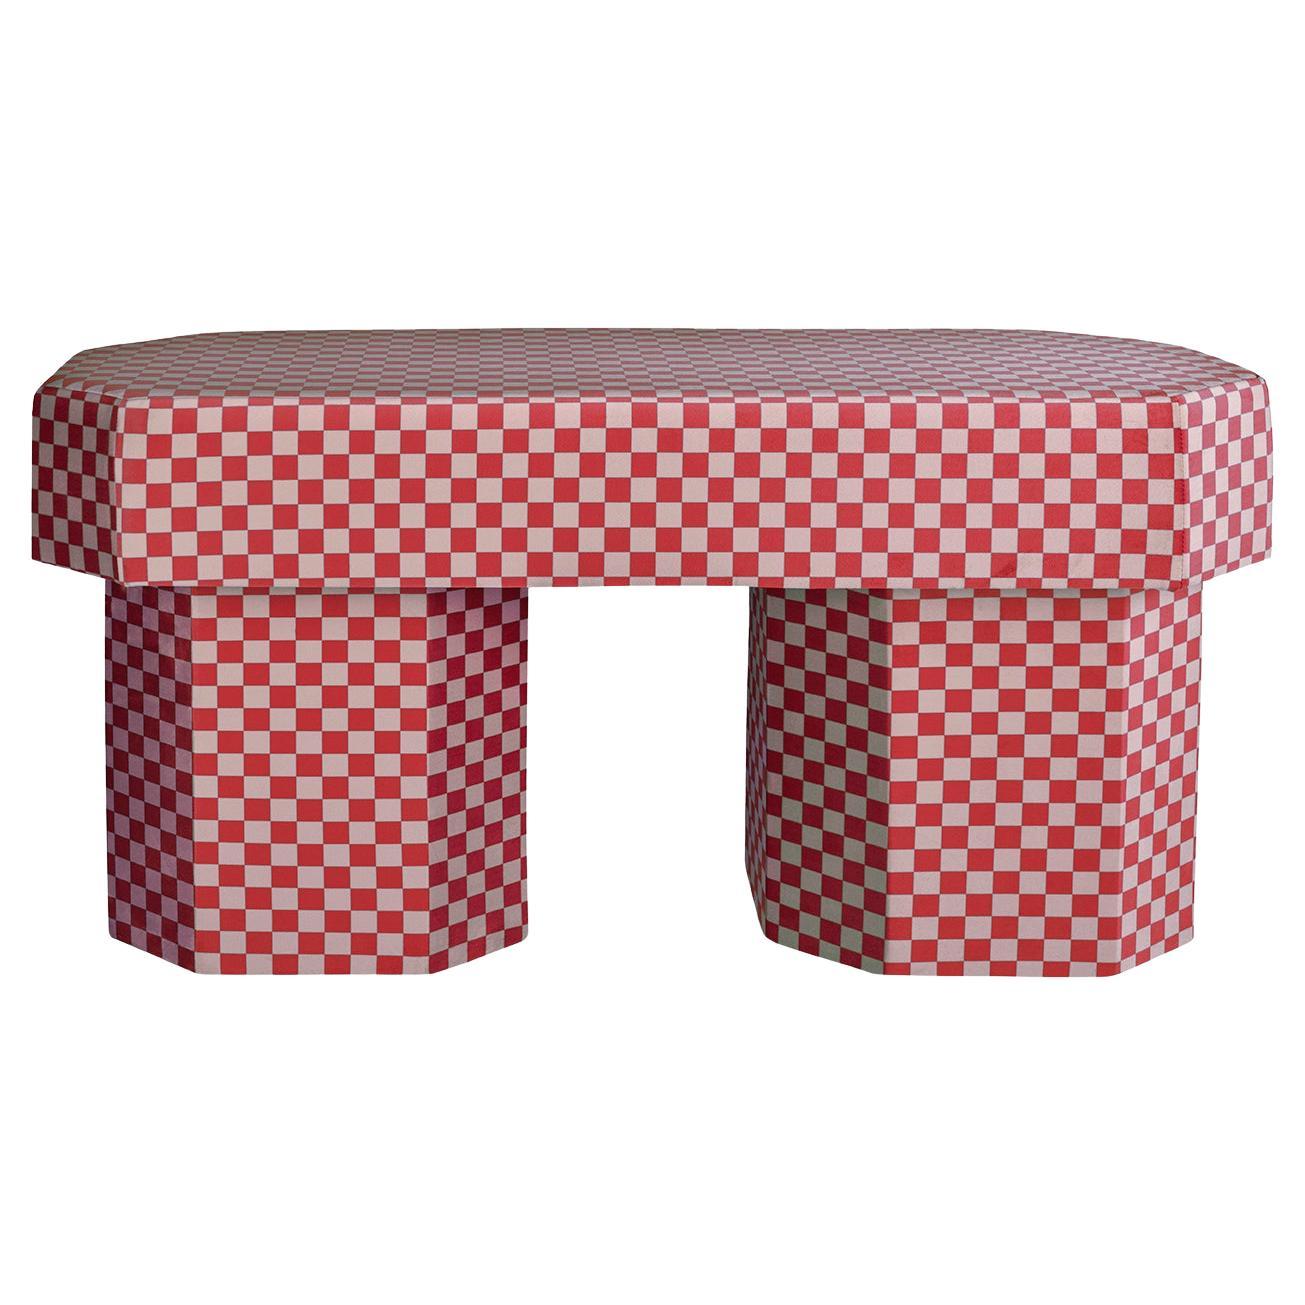 Viva Checkerboard Red and Pink Bench by Houtique For Sale